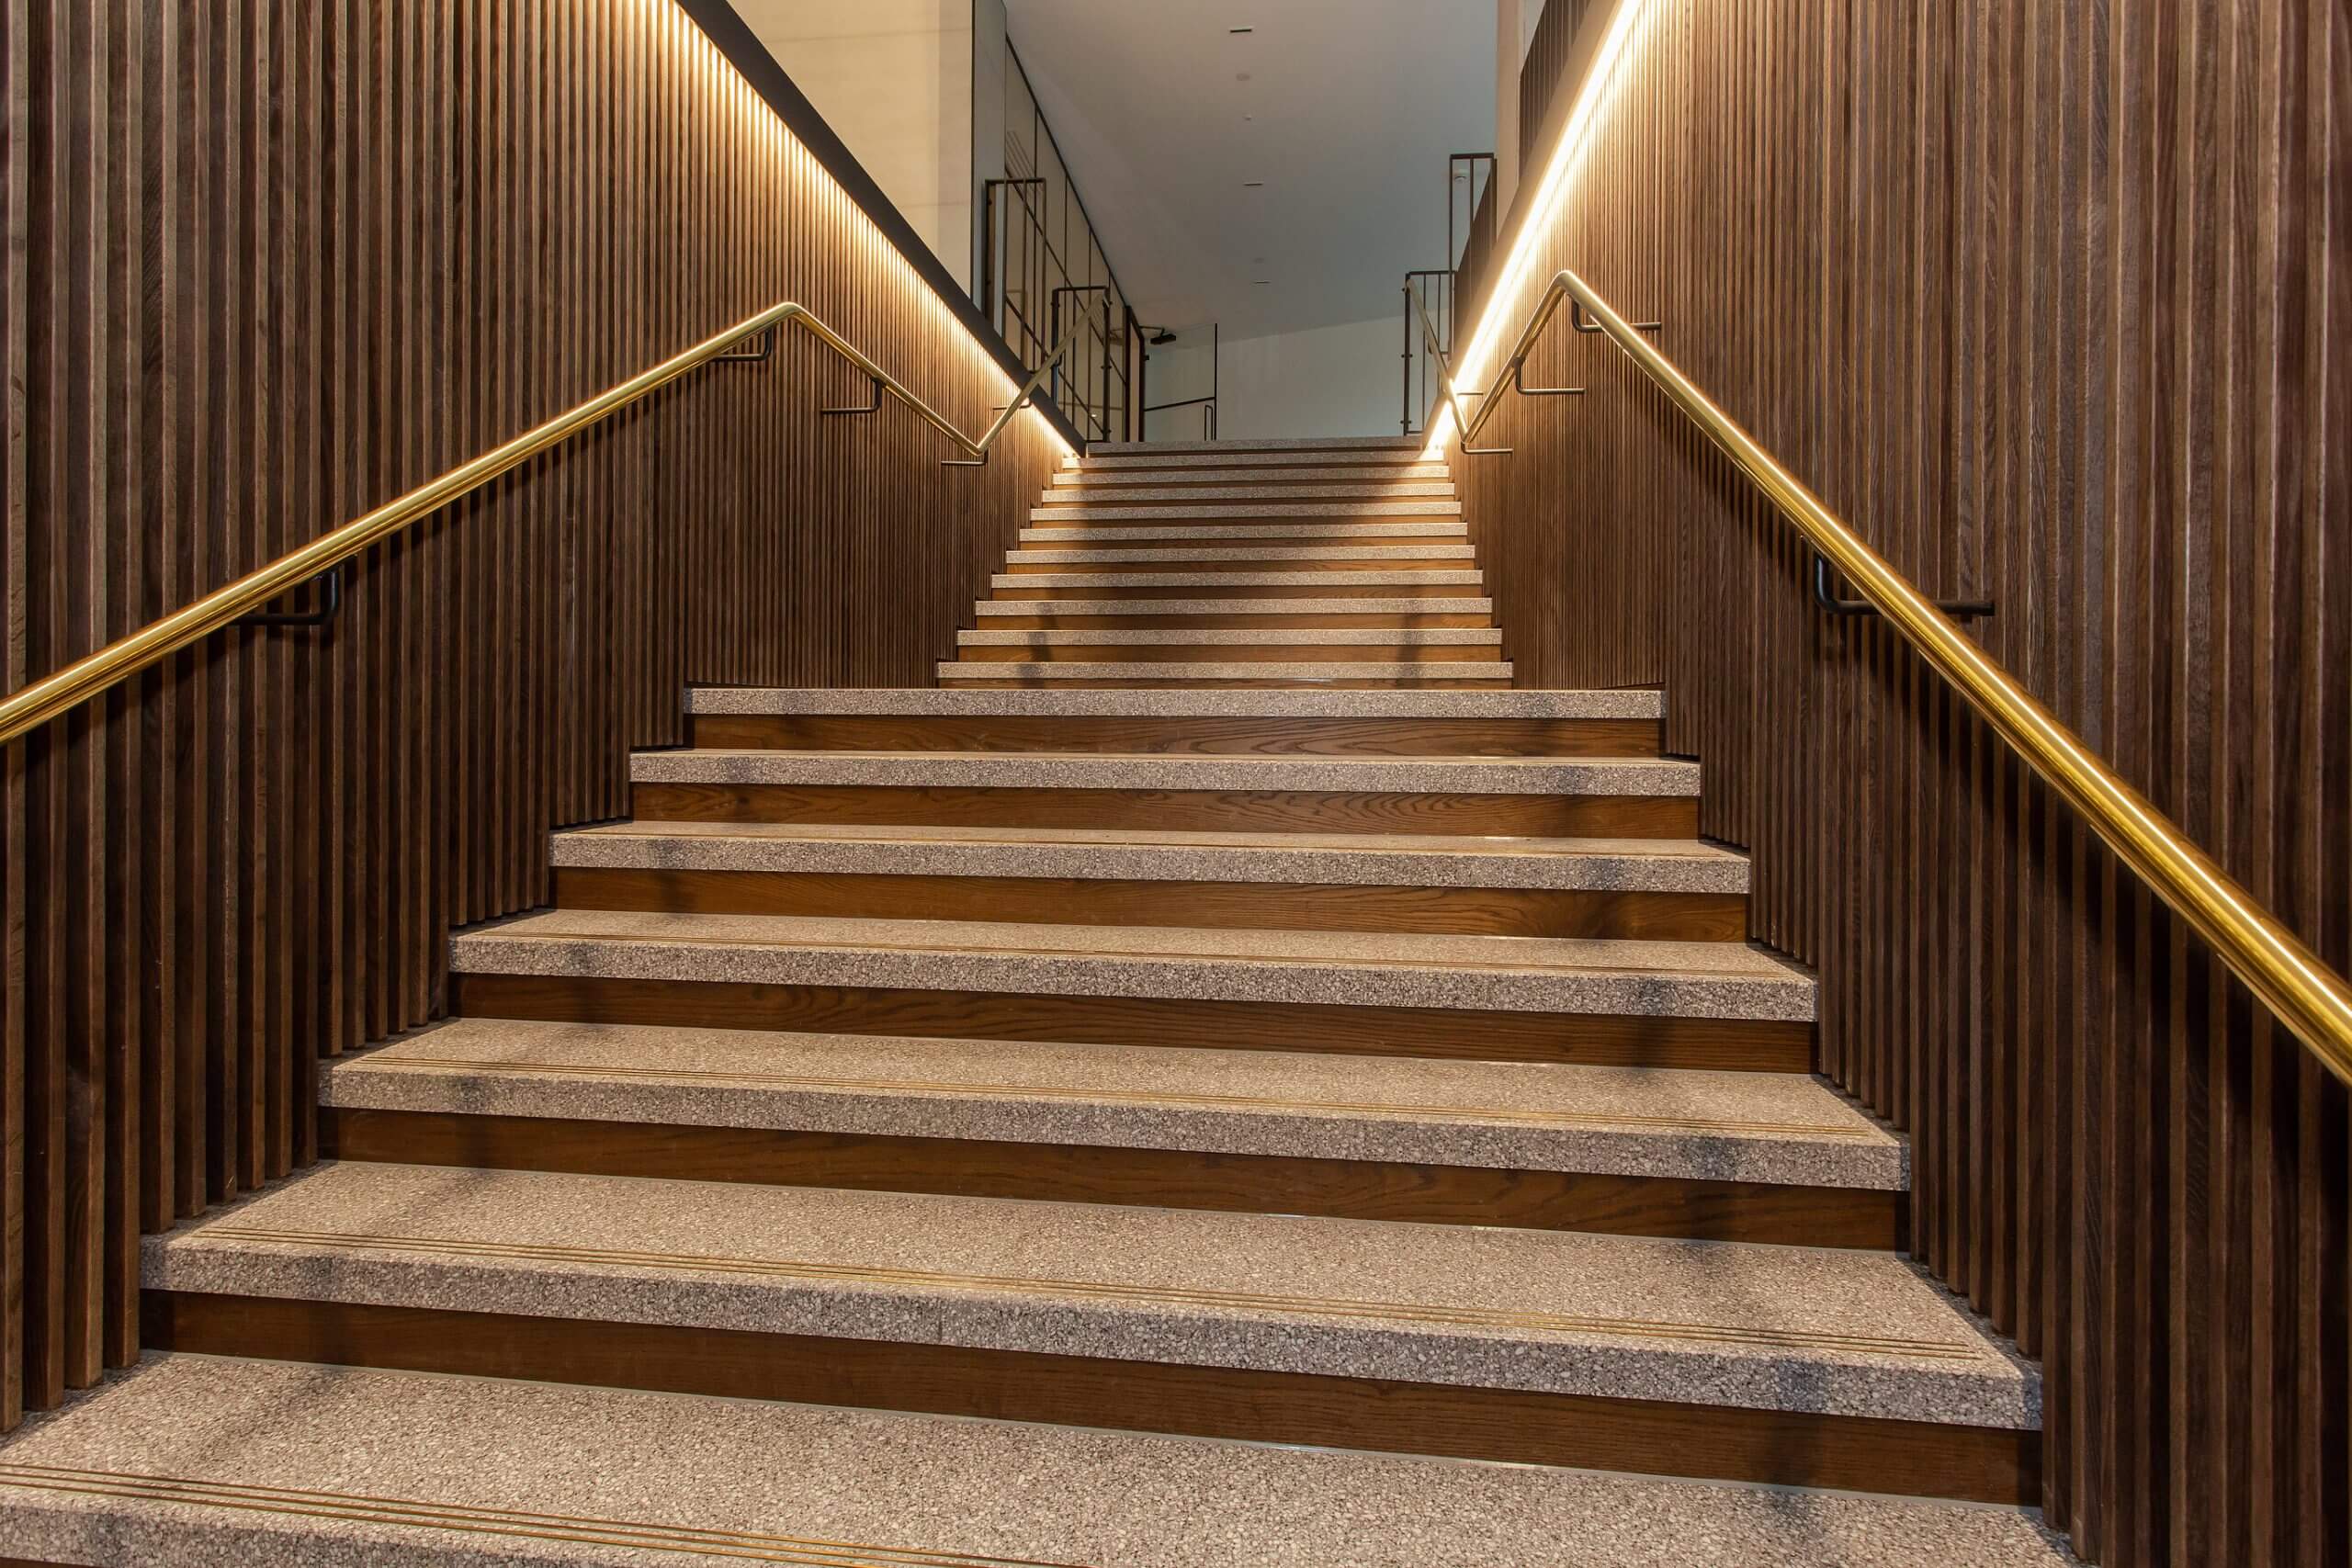 Slatted Timber Features in Premium Residential Building